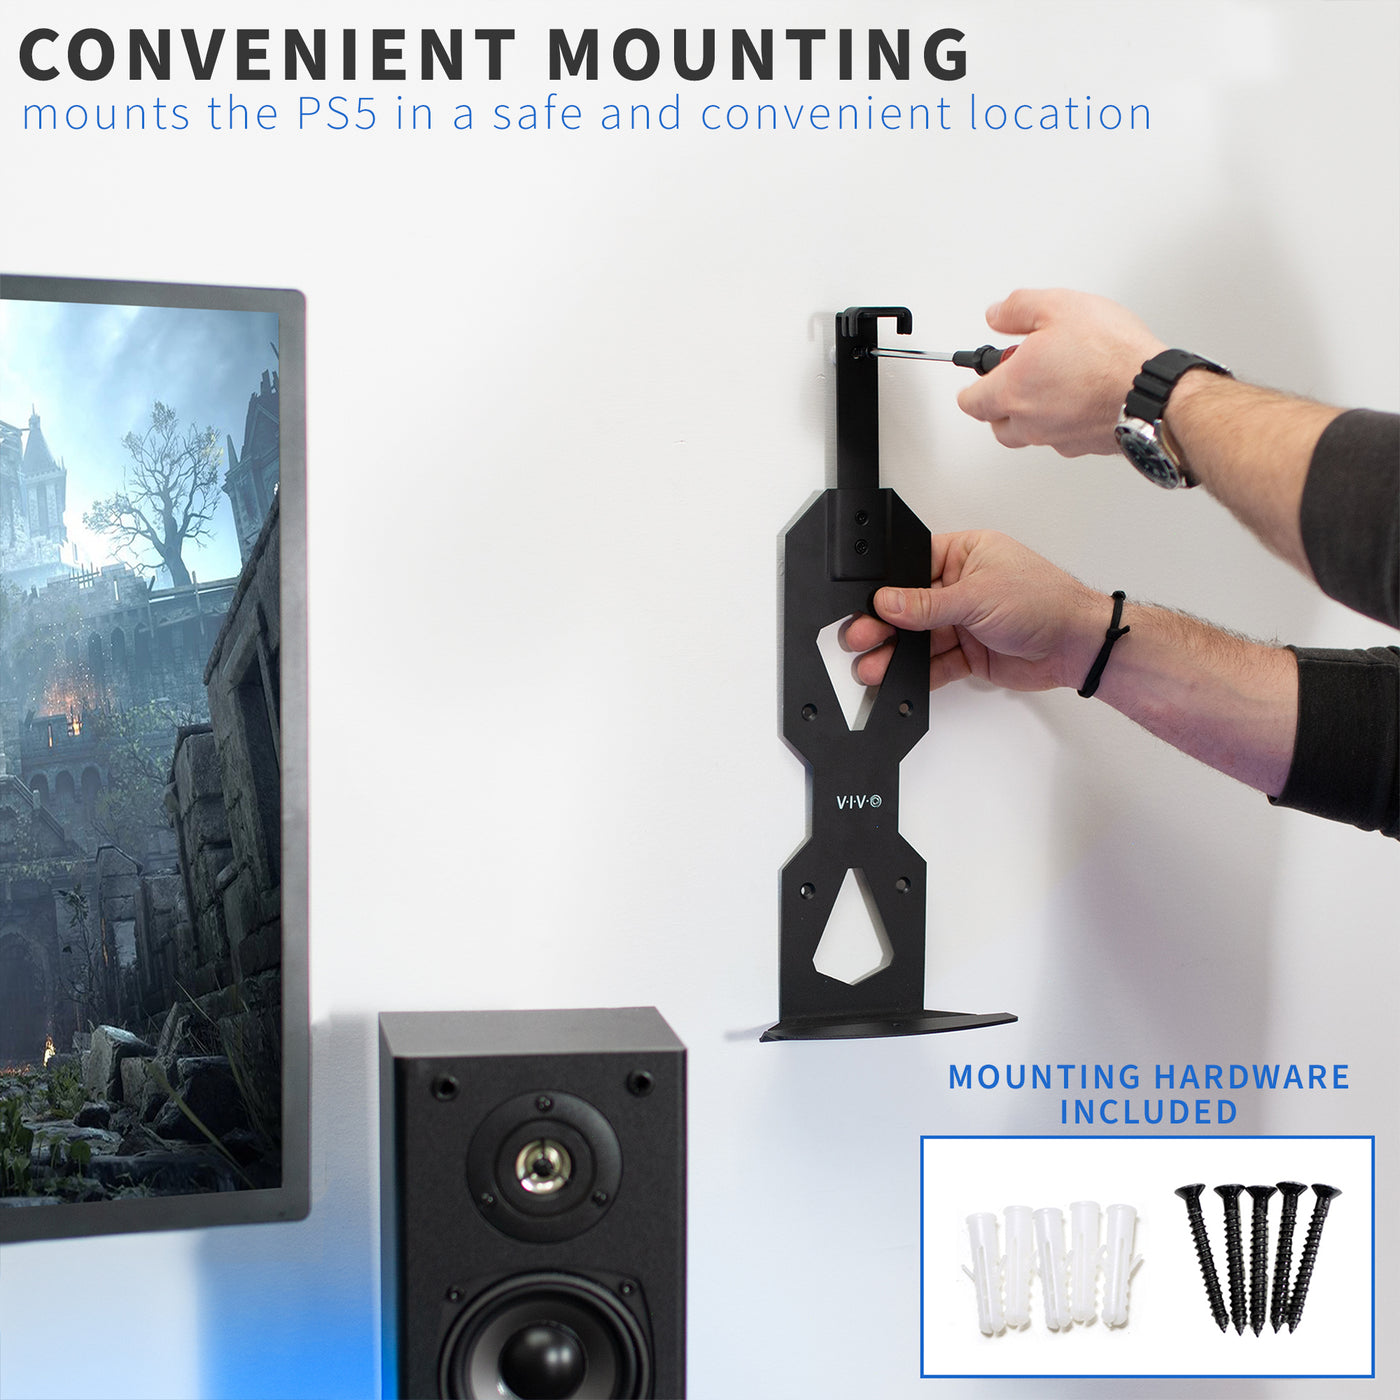 Installation of mounts is made easy with all the necessary hardware included.